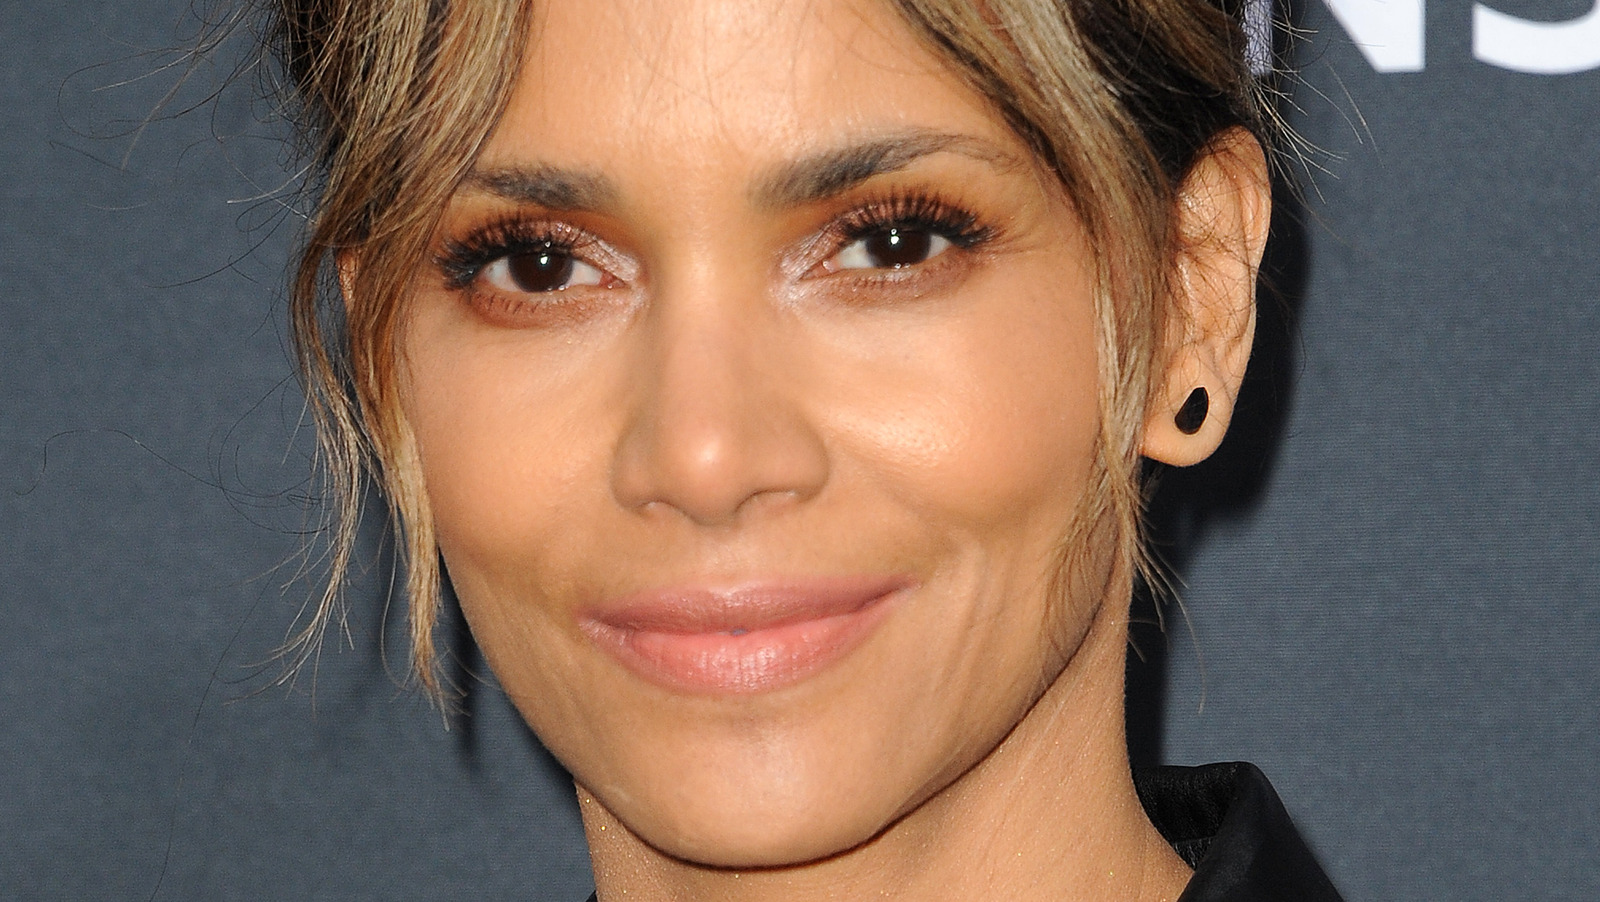 Halle Berry shares the moment she knew her son loved Van Hunt and it was an emotional moment.